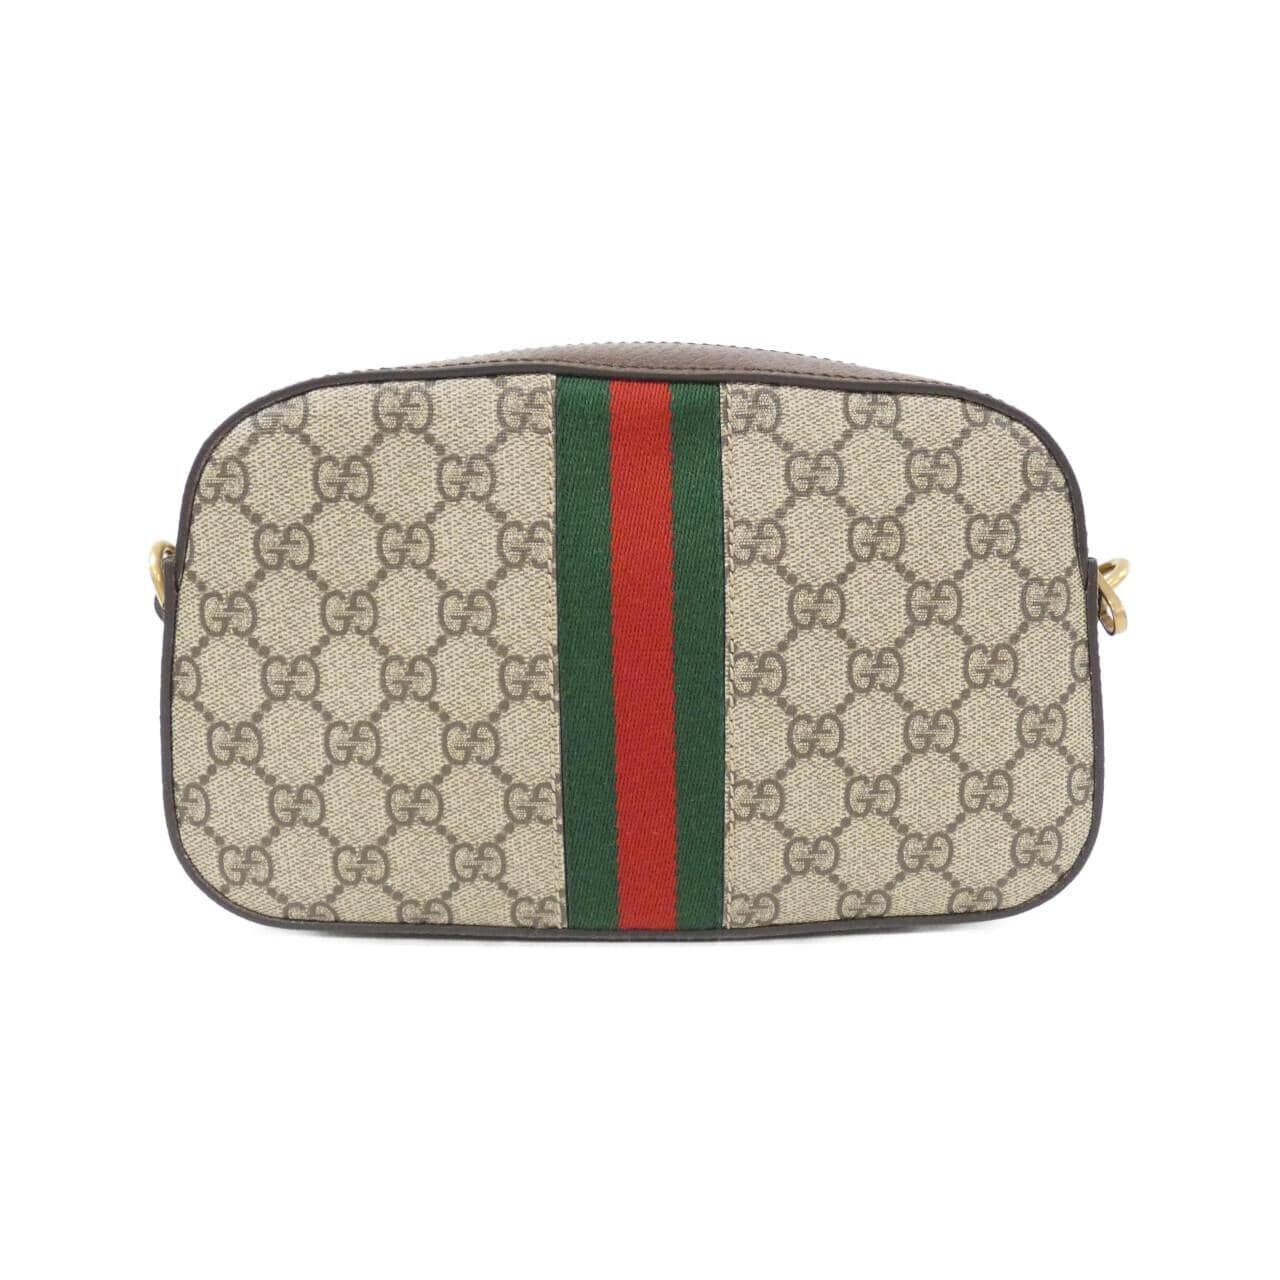 [BRAND NEW] Gucci OPHIDIA 752591 FACFW Shoulder Bag